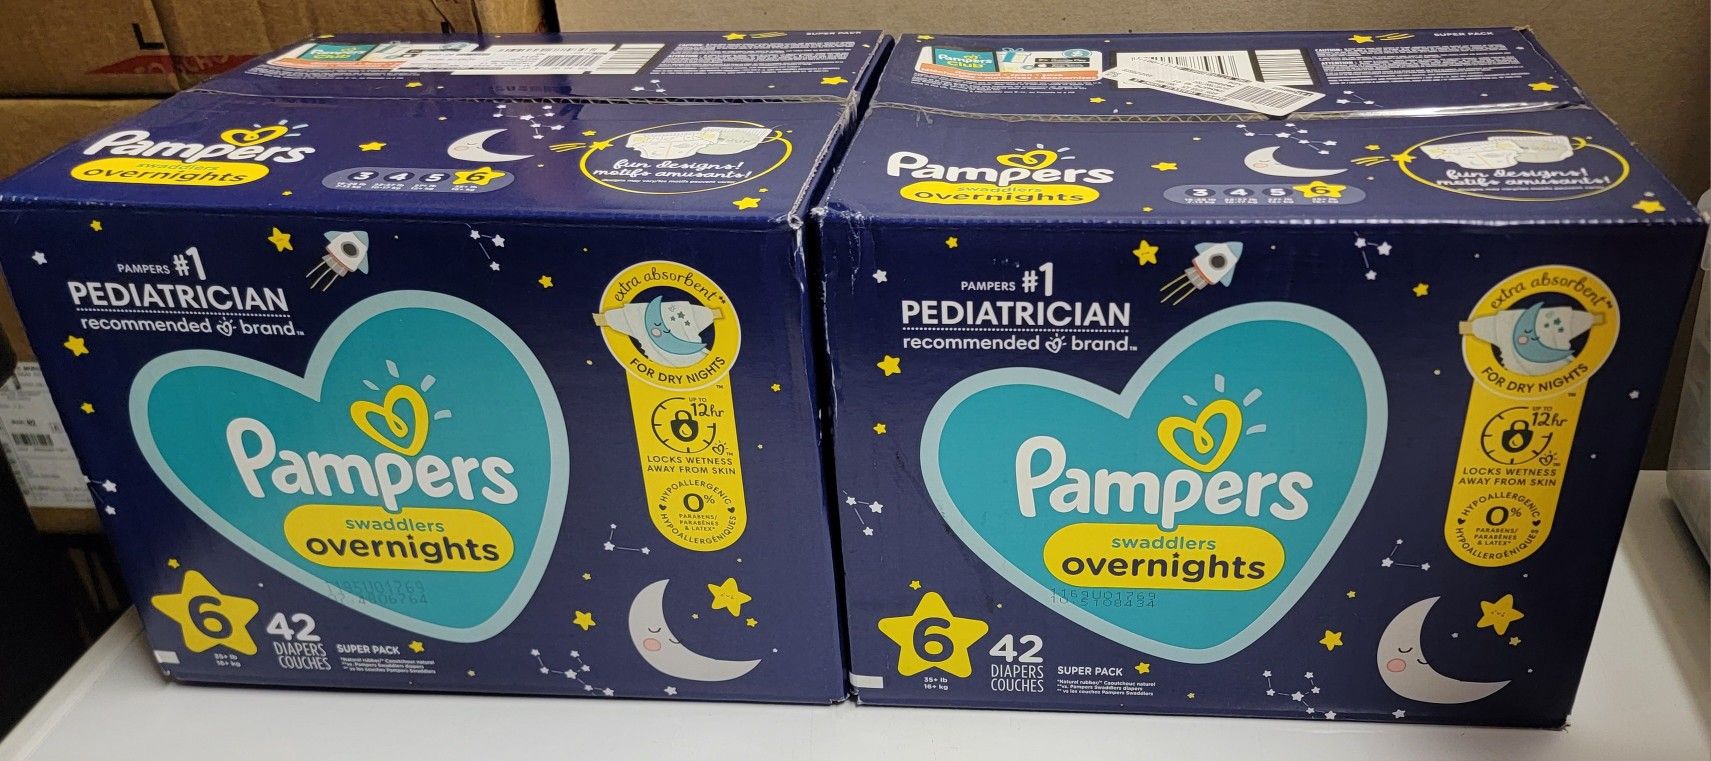 Pampers Swaddlers Overnights Diapers Size 6, 42 count - Disposable Diapers

 (lot of 2 boxes)